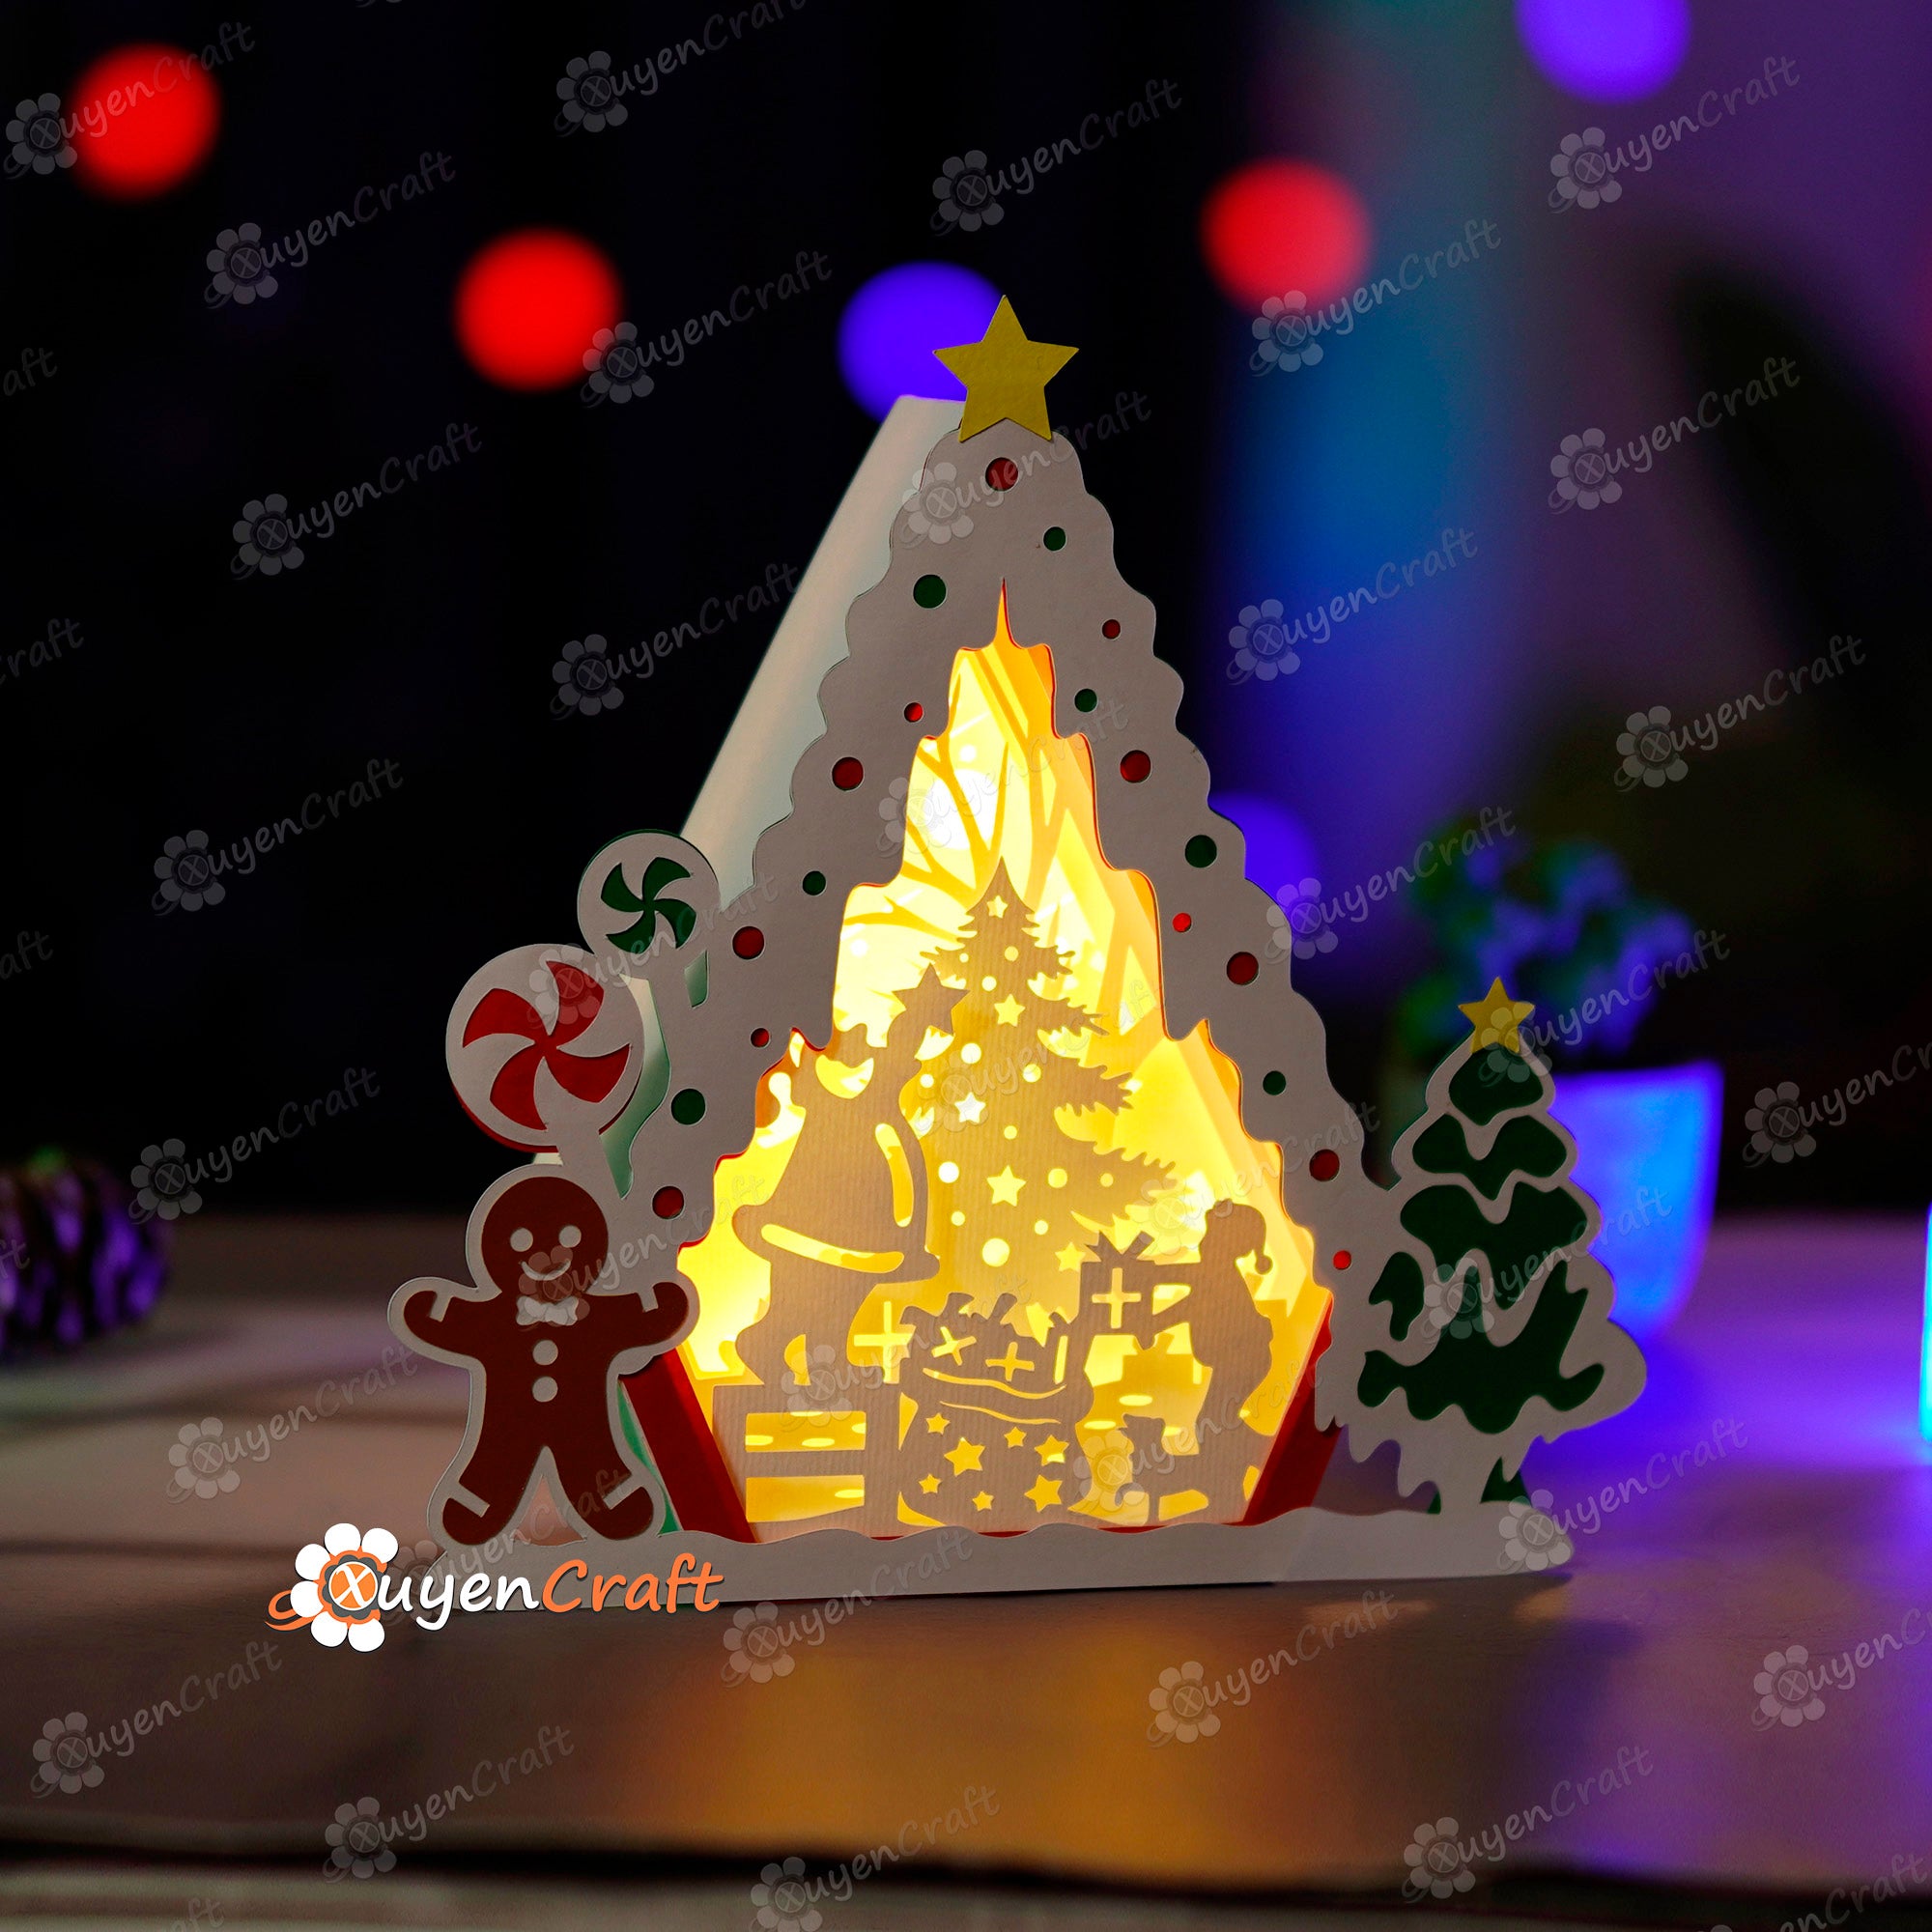 Pack 3 Gingerbread House Shadow Box SVG Light Box - Candy House Christmas Lantern - Paper Cut Template For Christmas - Snowman House svg